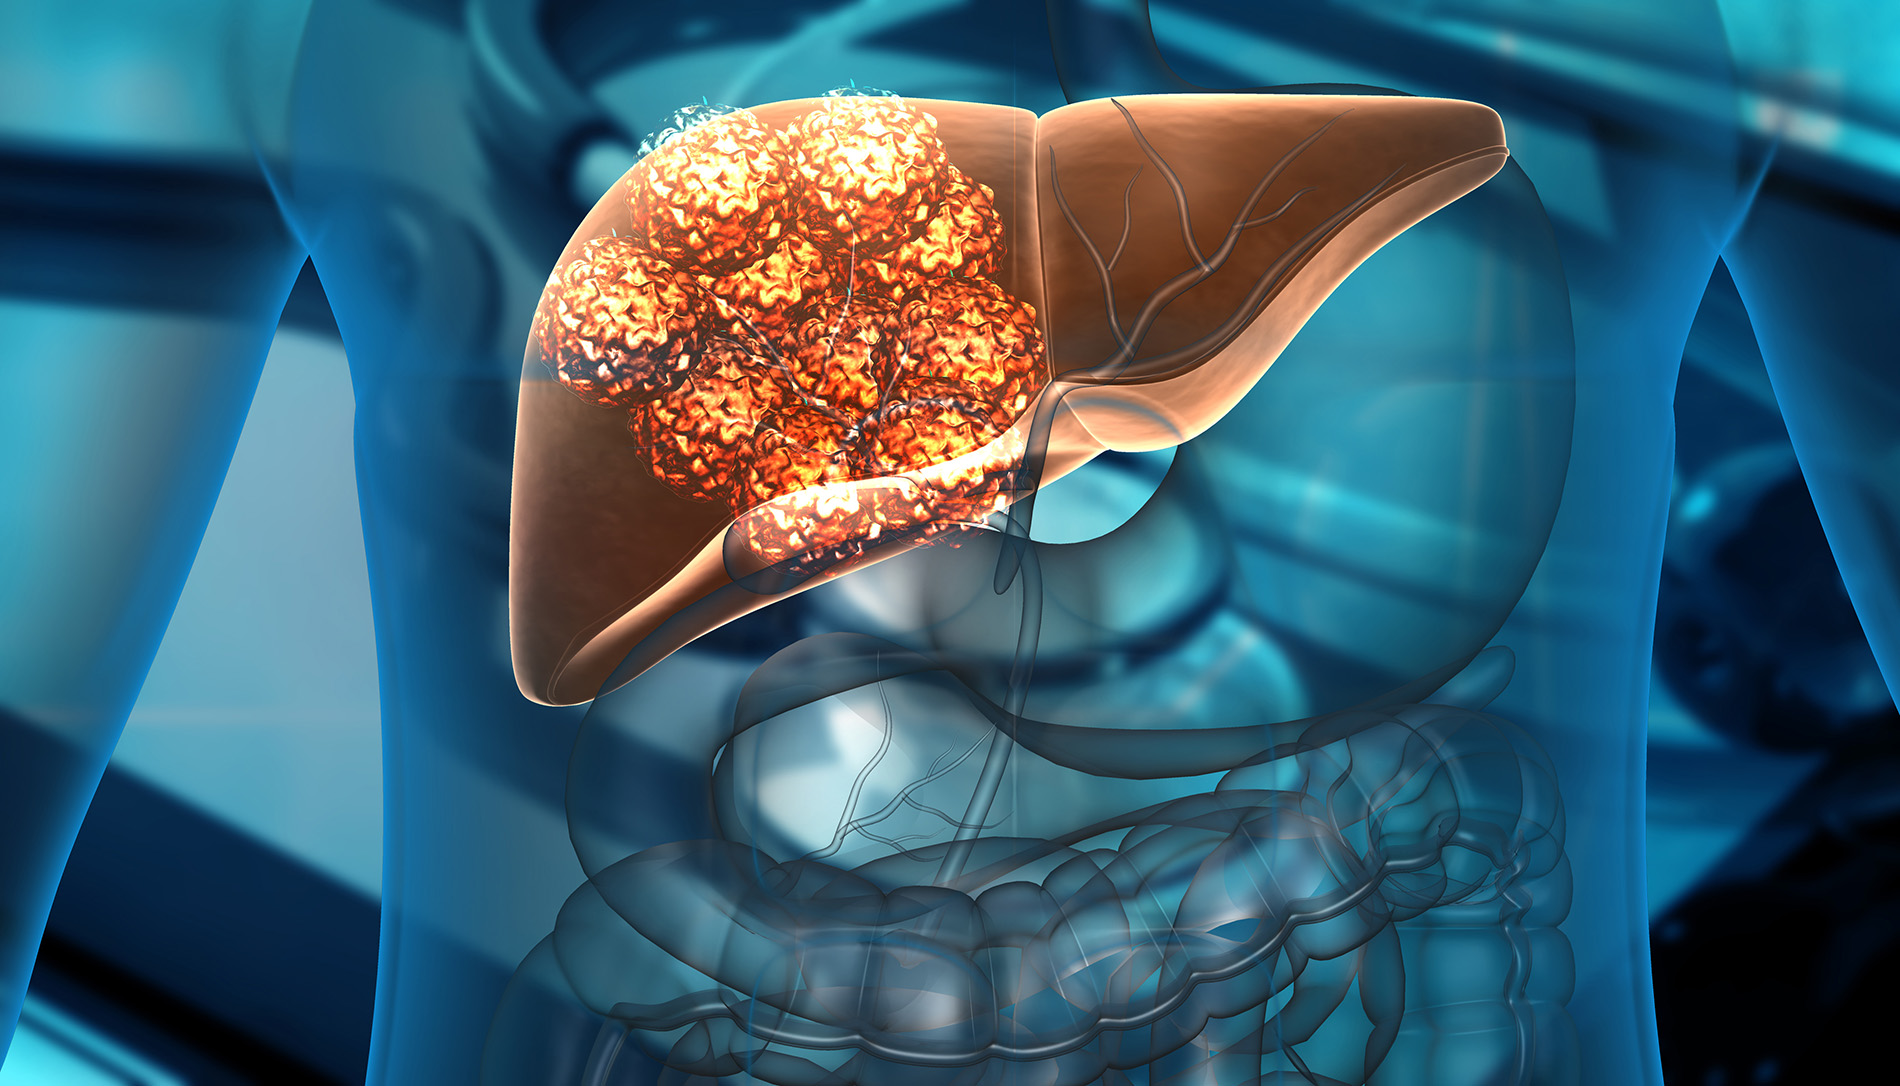 liver metastasis treated with CyberKnife - liver metastasis treatment options - liver metastasis therapy near me